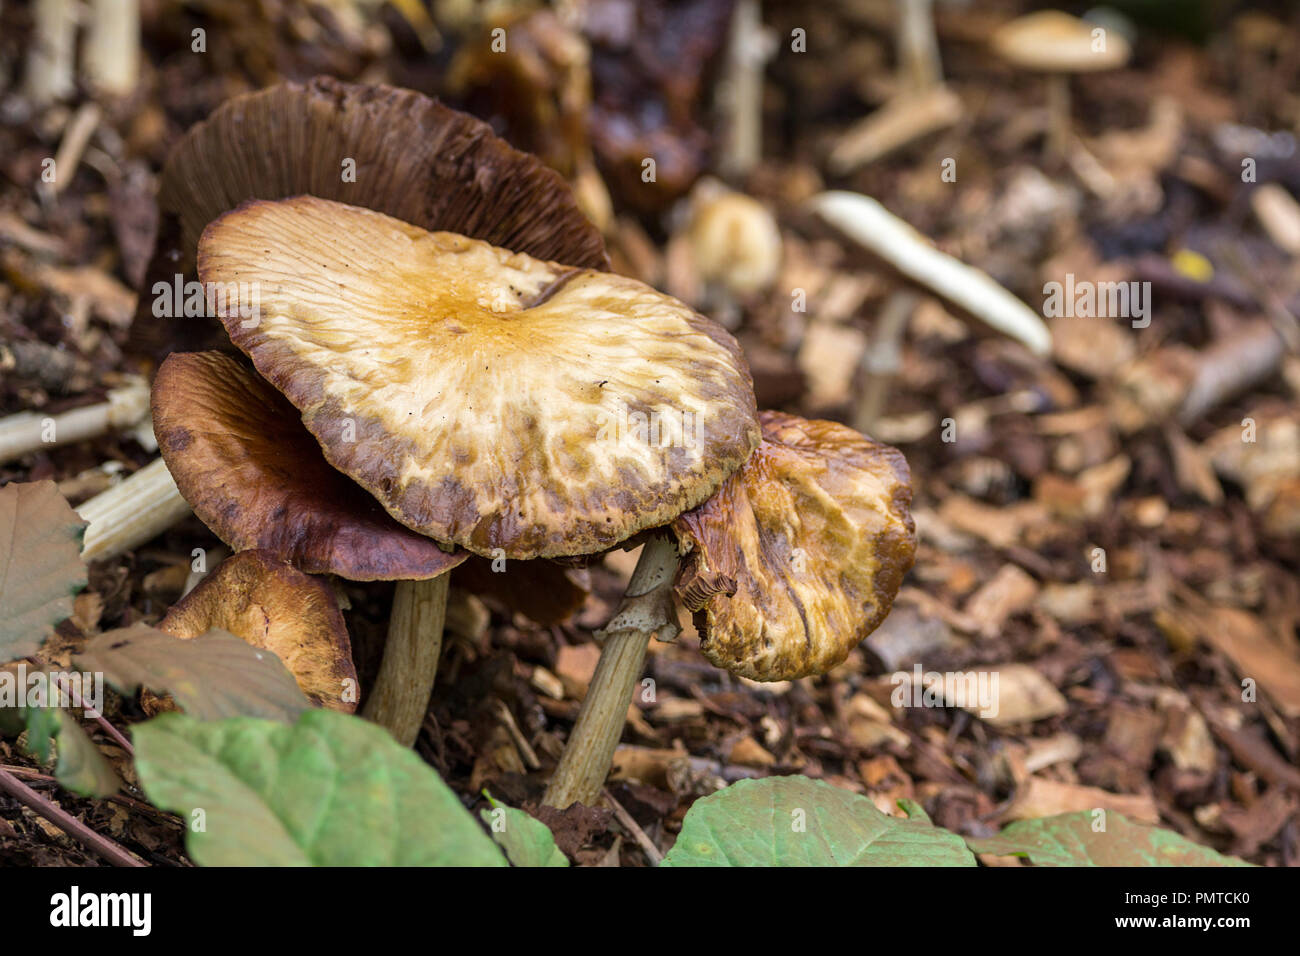 Fungi toad stall growing in woodchip areas near path at WWT Arundel UK. Brown mottled cream top and brown gills dimples in flat floppy caps grey stalk Stock Photo